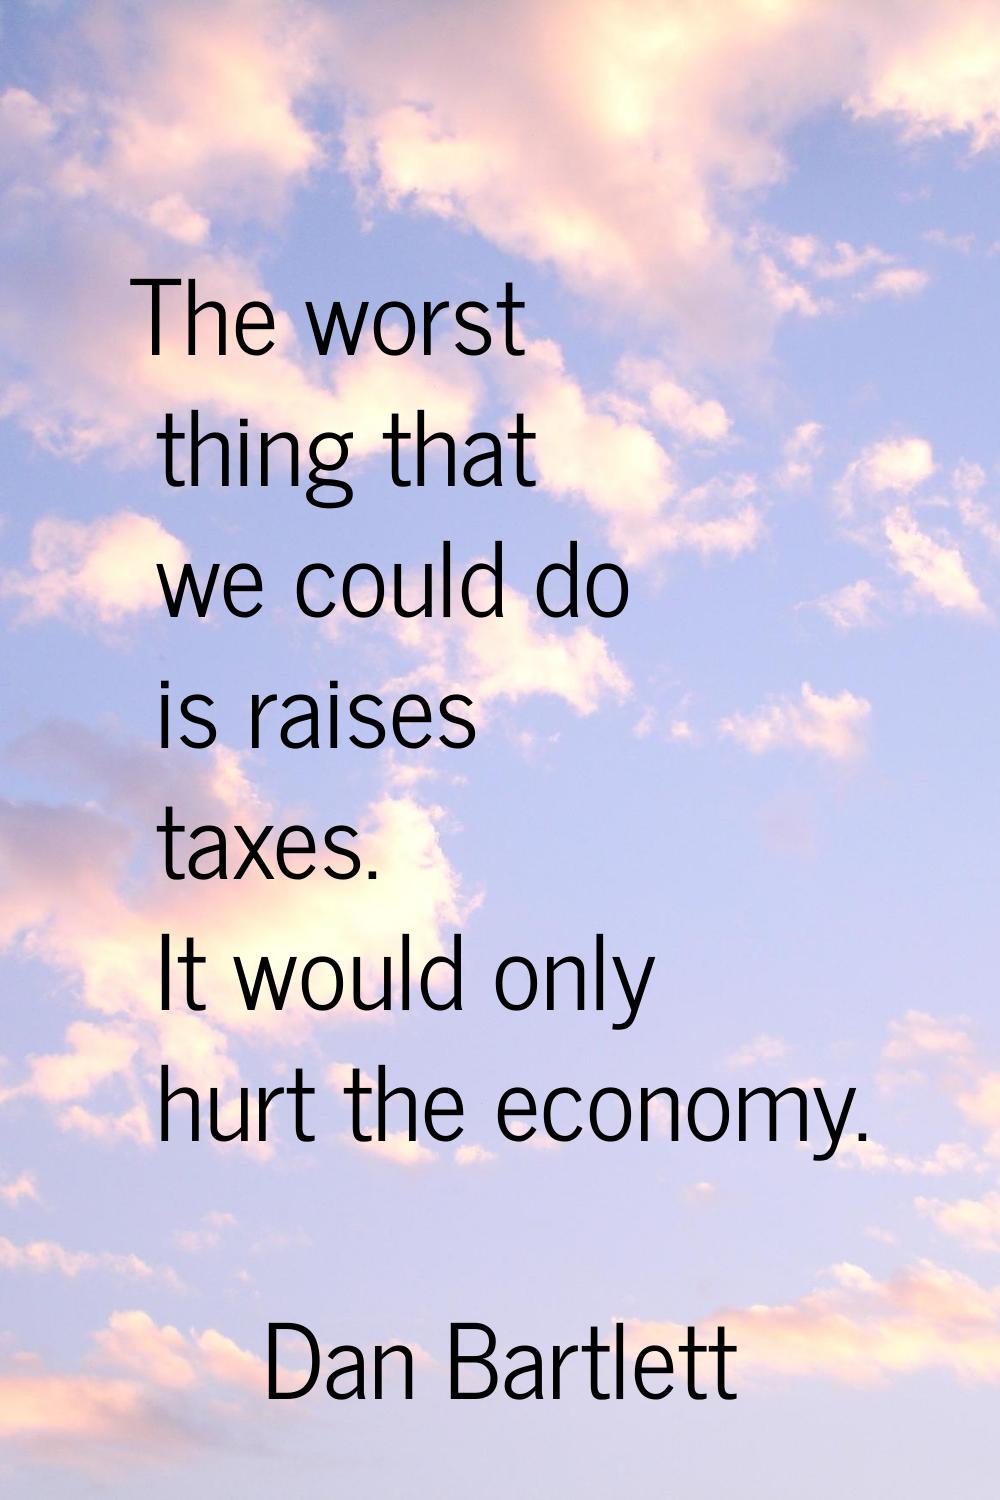 The worst thing that we could do is raises taxes. It would only hurt the economy.